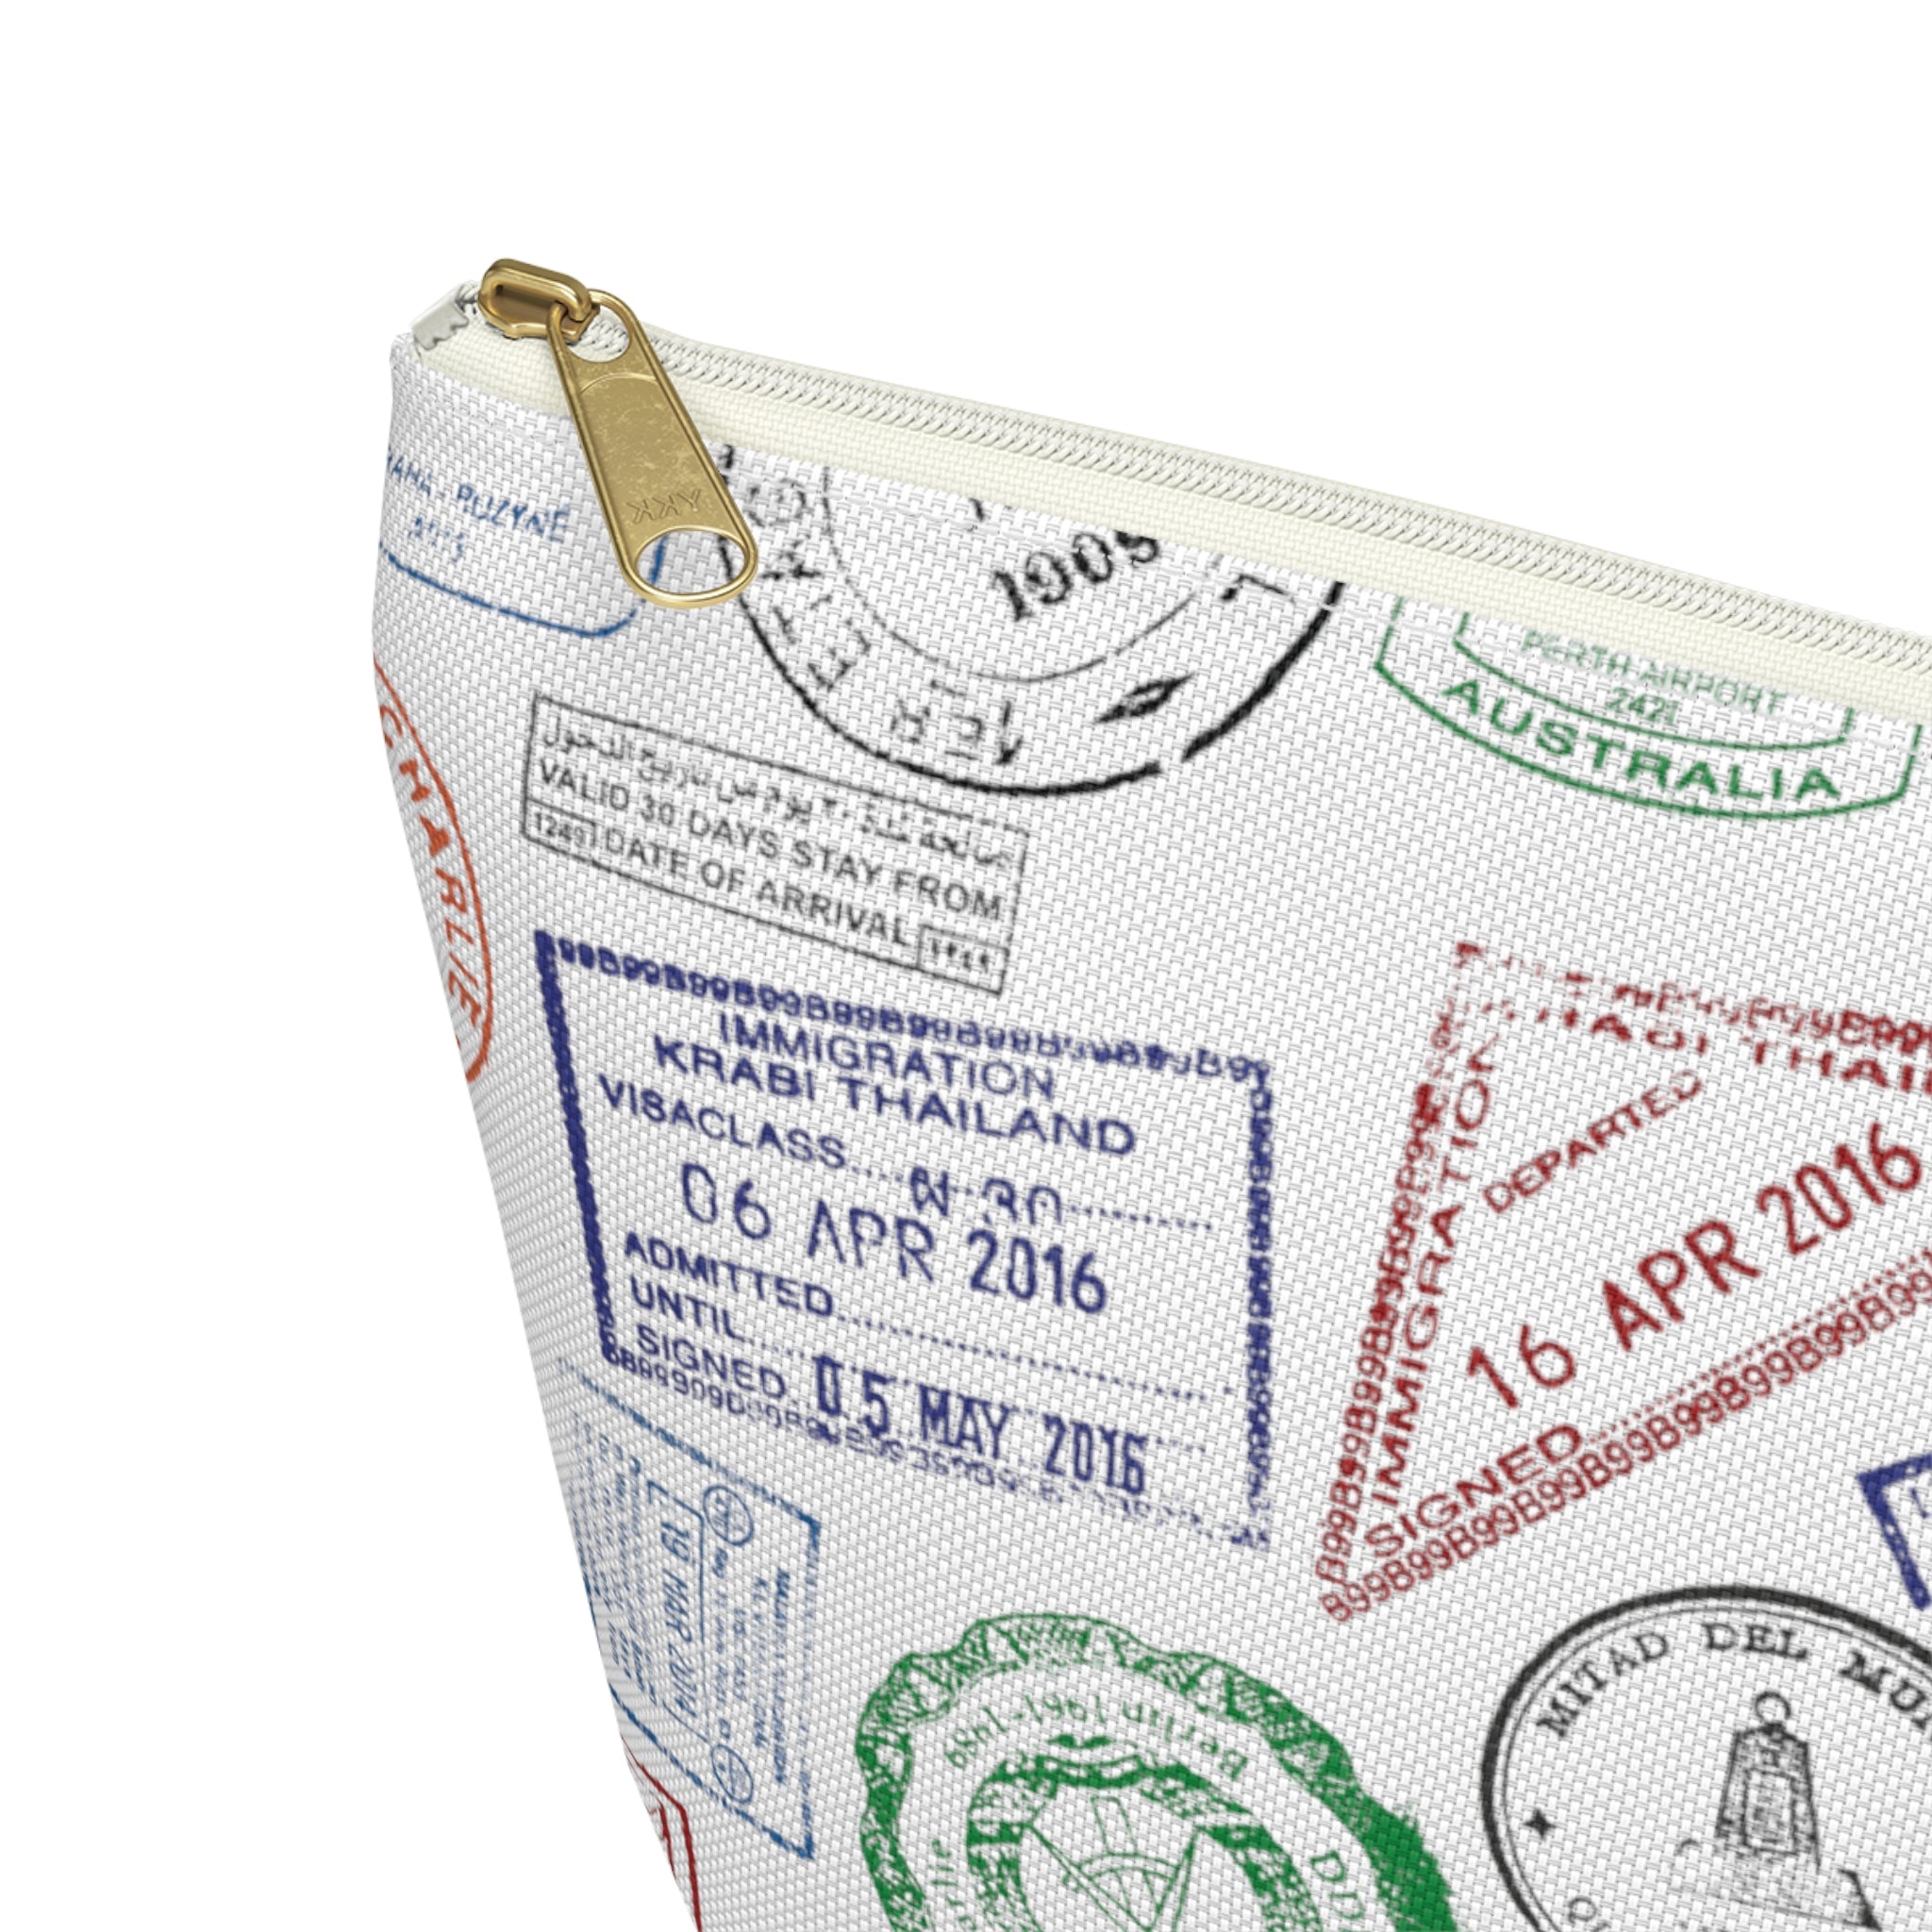 Passport Stamps T-Bottom Accessory Pouch